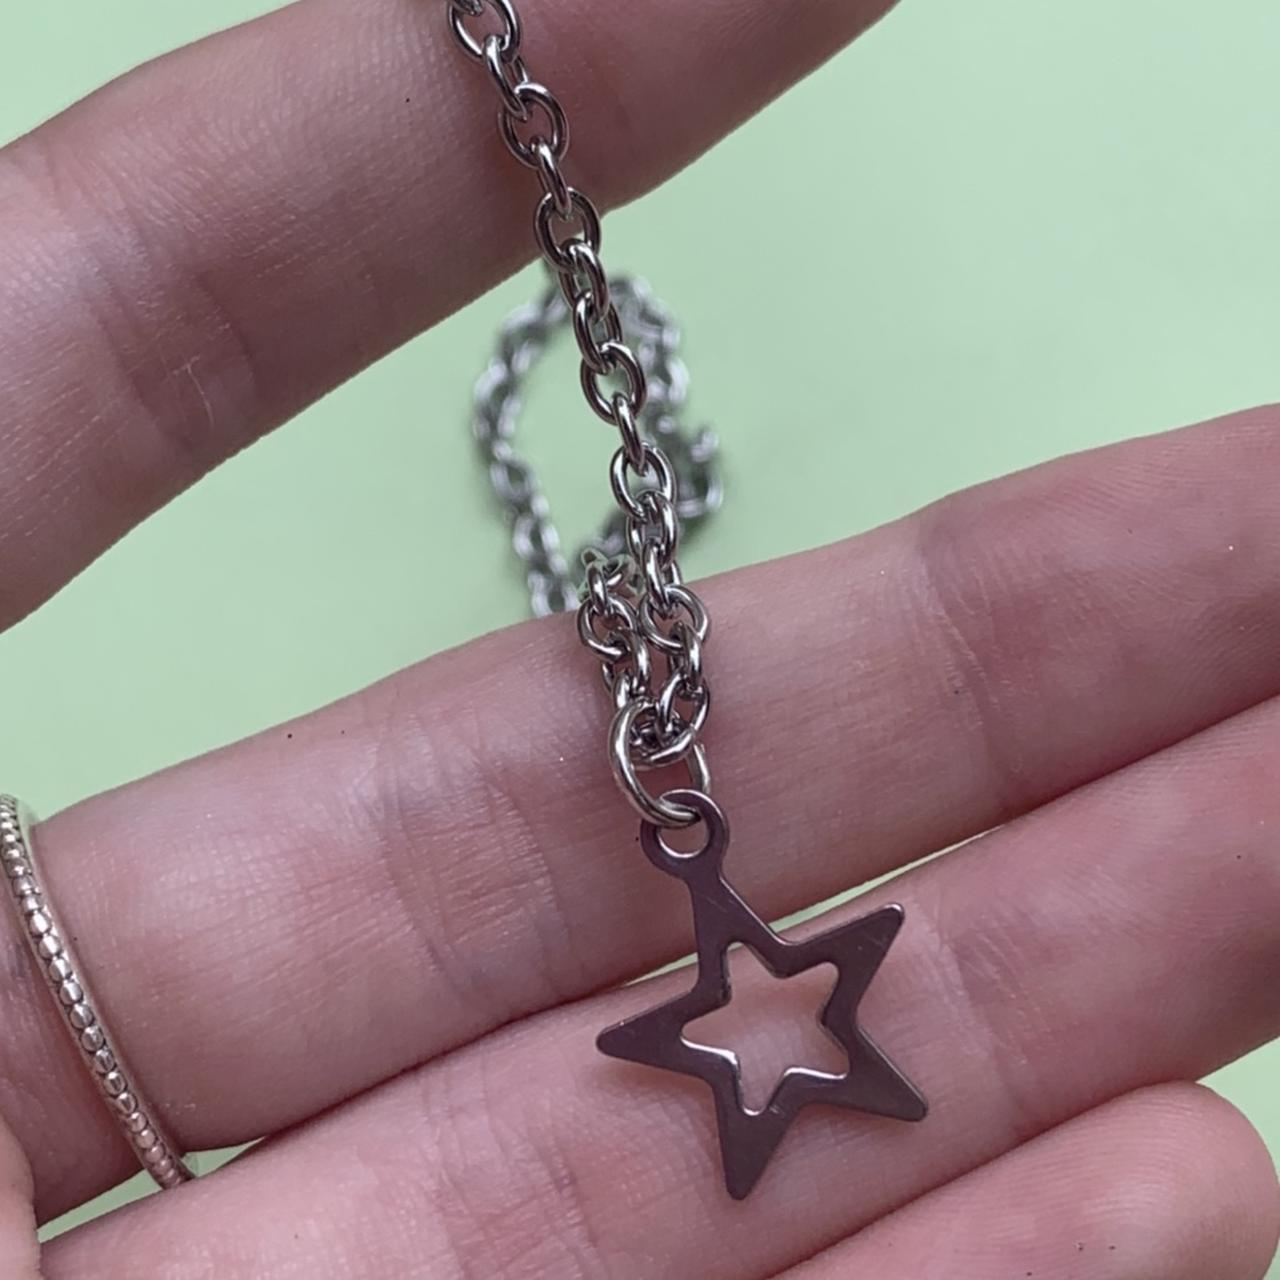 The Star Chain necklace